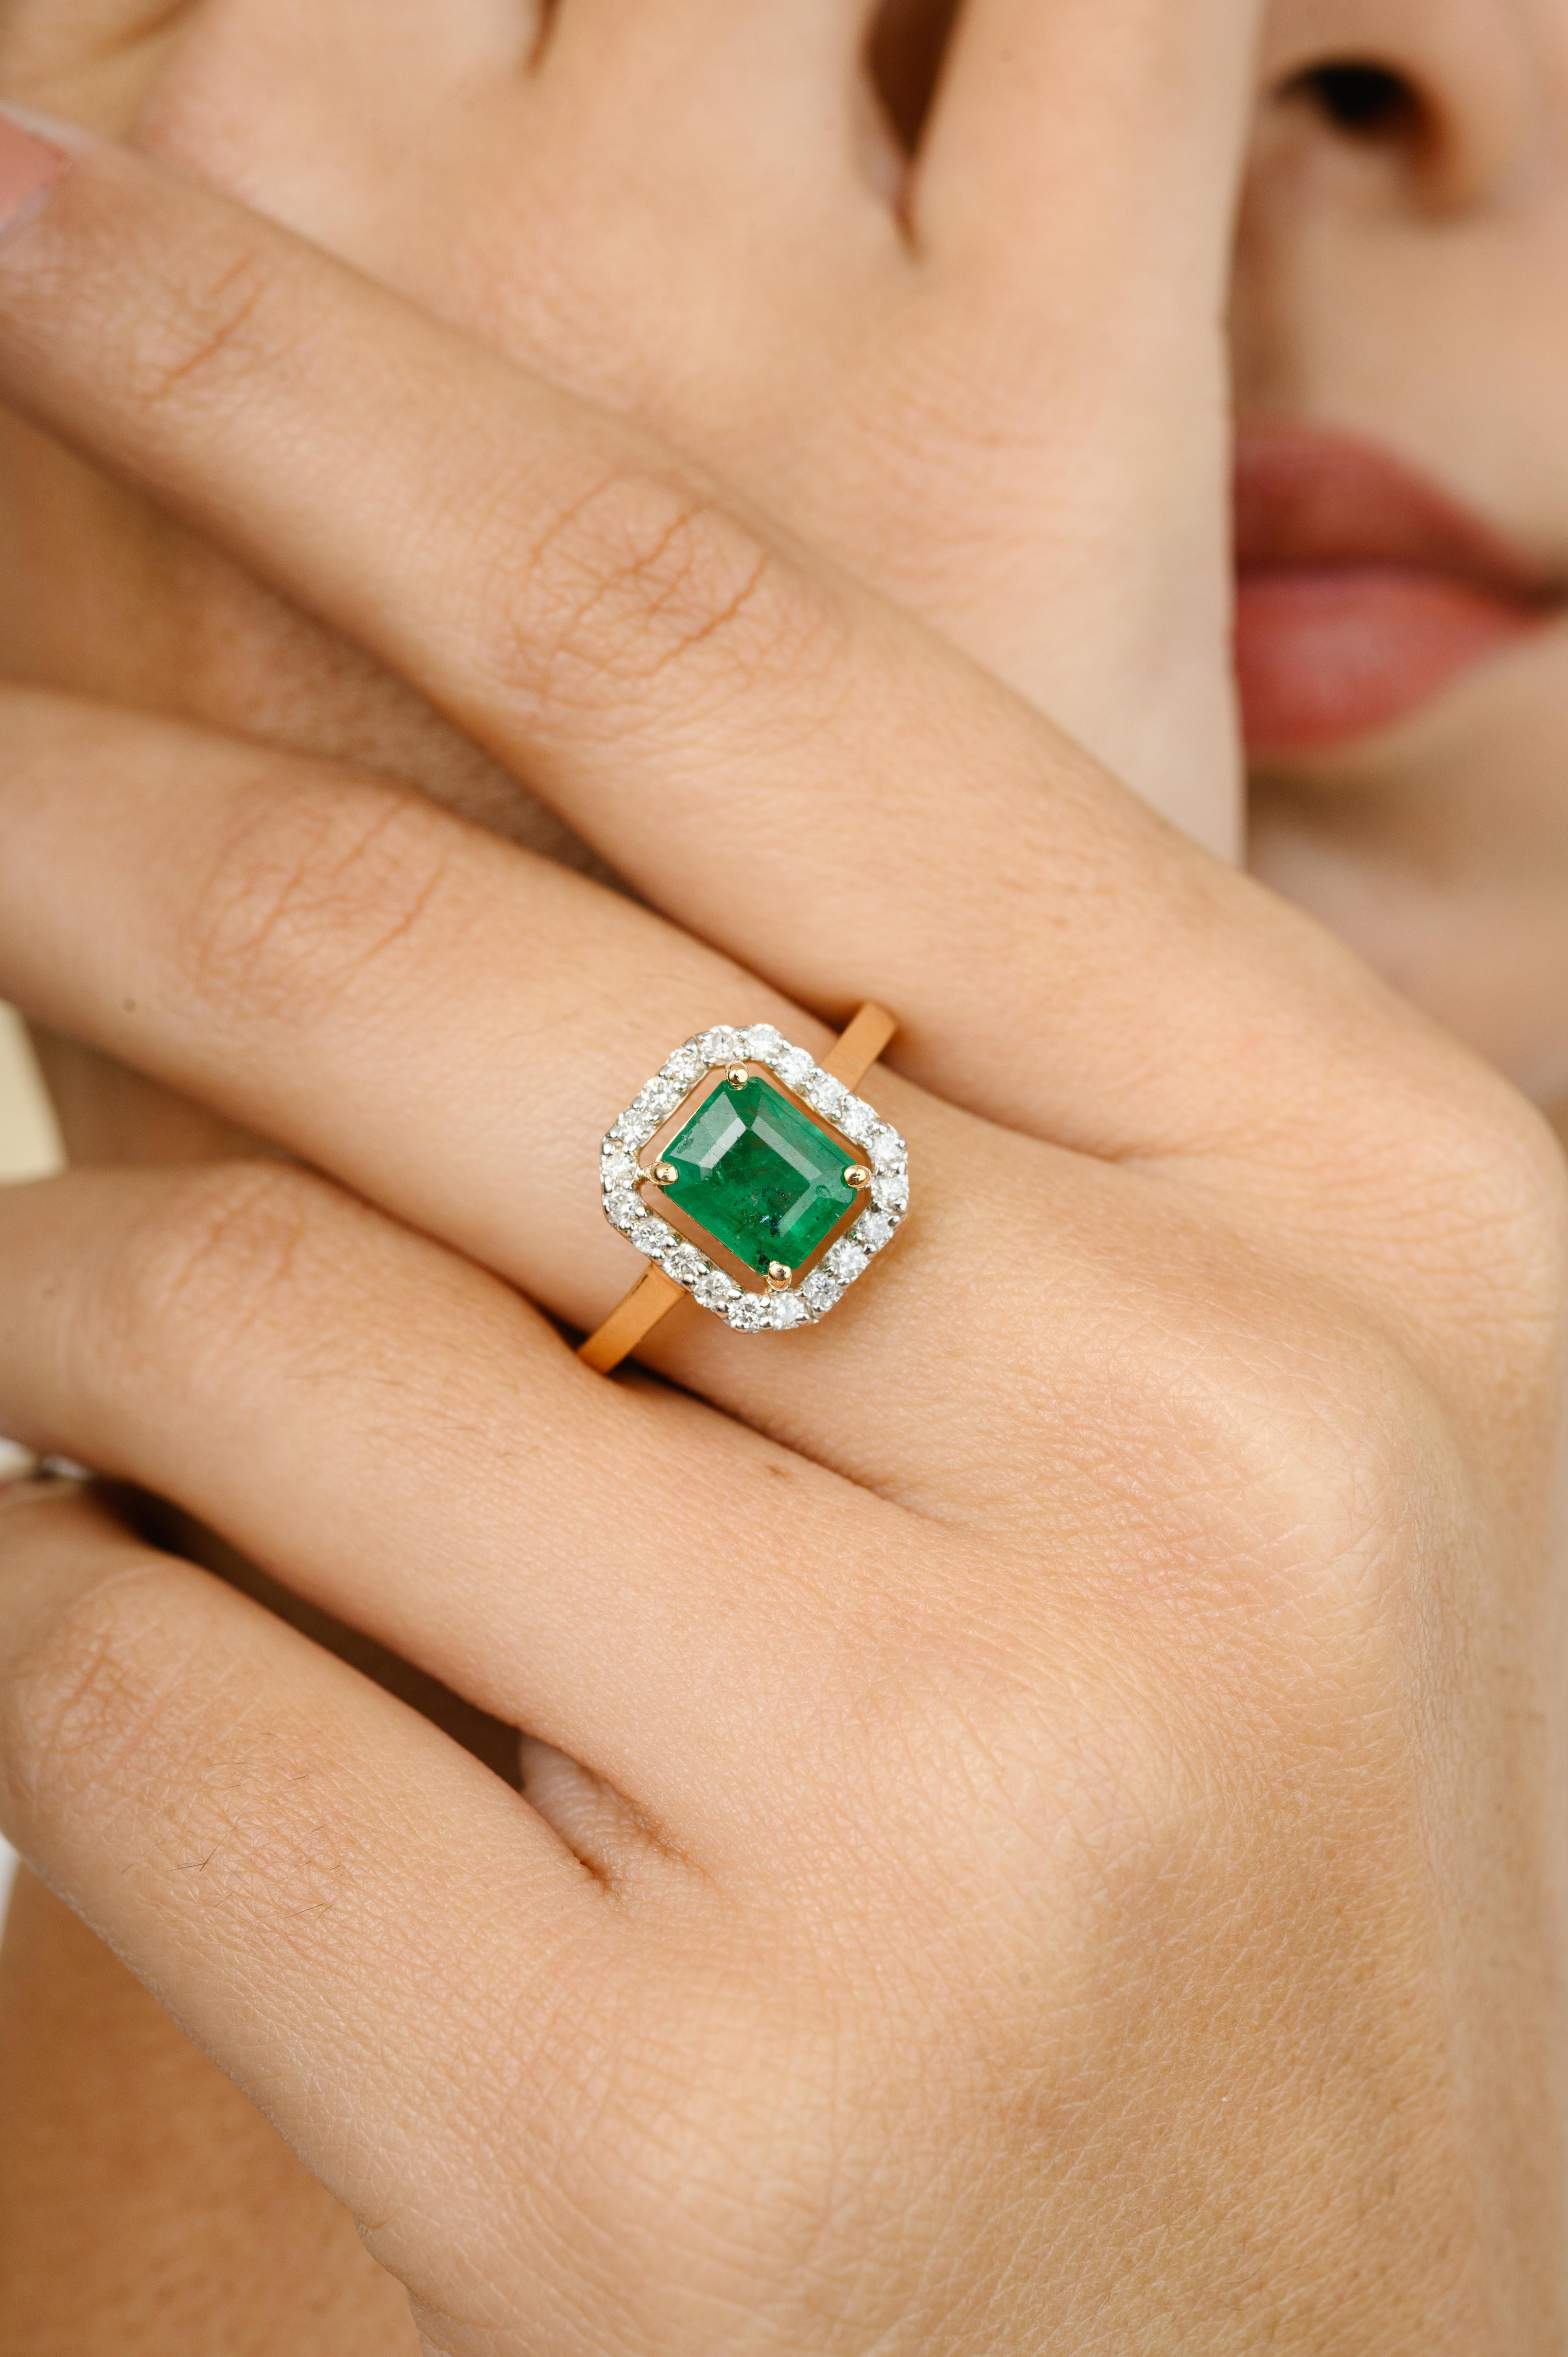 For Sale:  1.5 Carat Octagon Emerald Halo Diamond Engagement Ring in 18k Yellow Gold 2